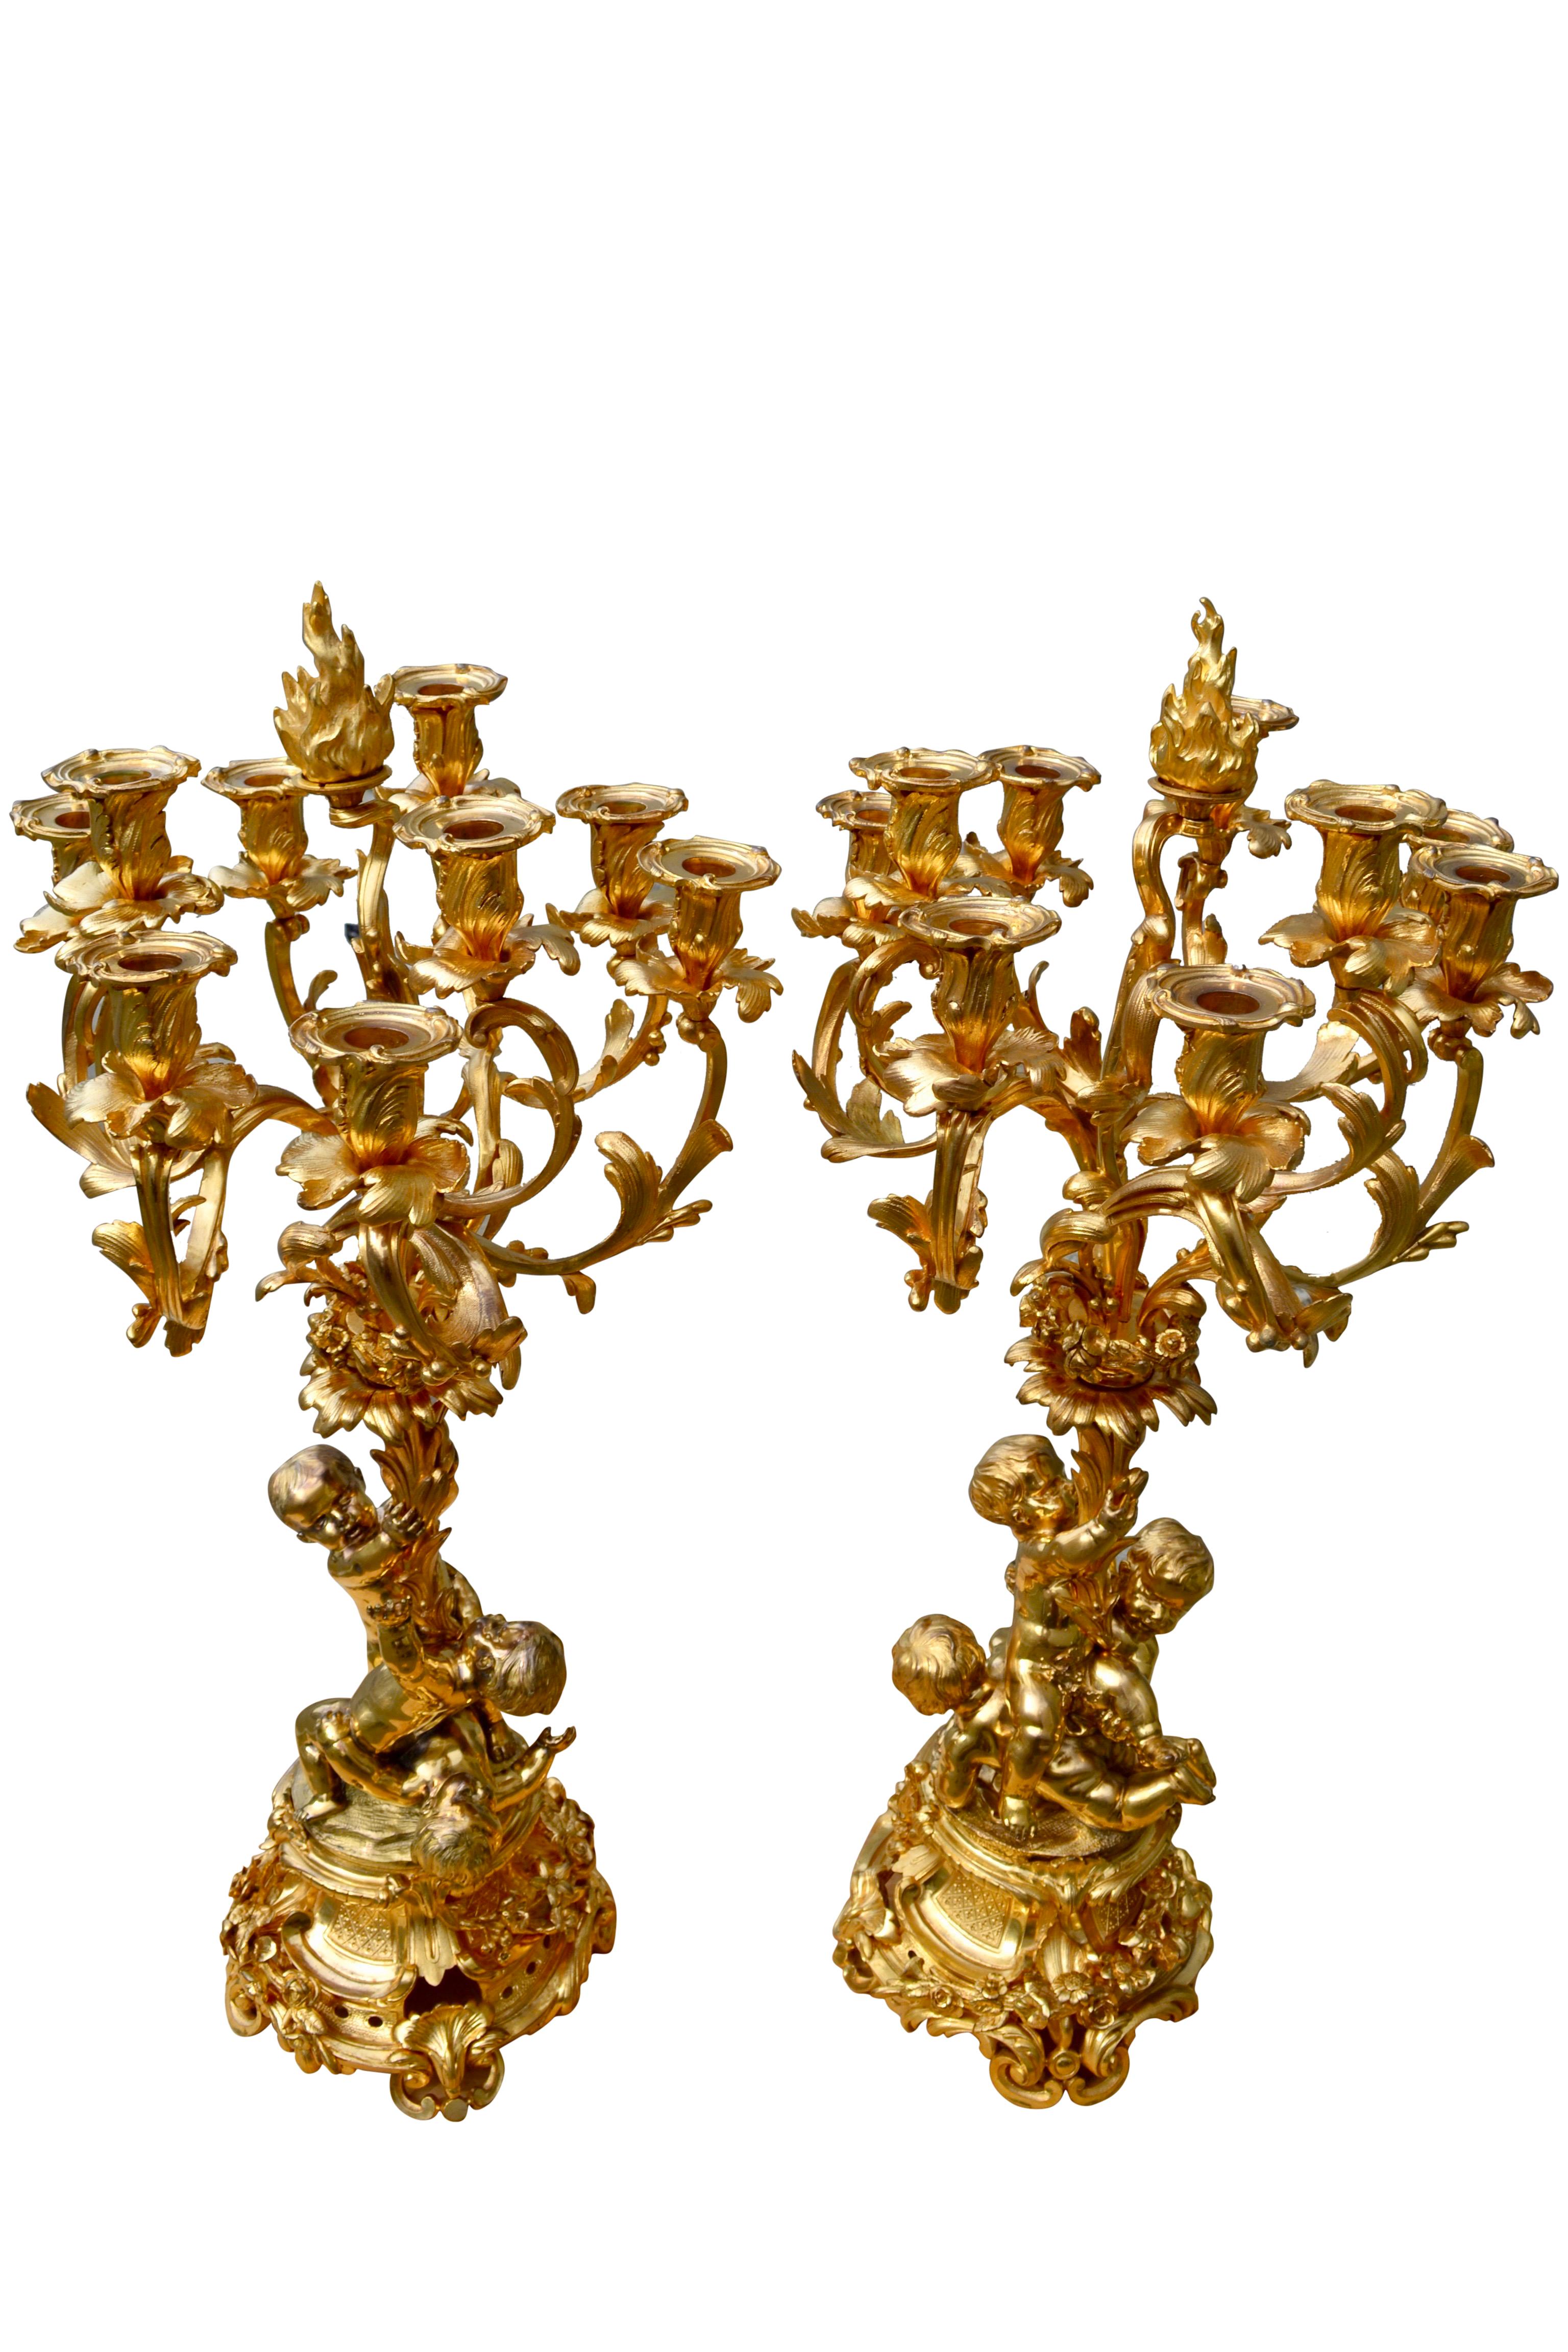 19th Century Napoleon III Period Gild Bronze Table Centre and Matching Candelabra